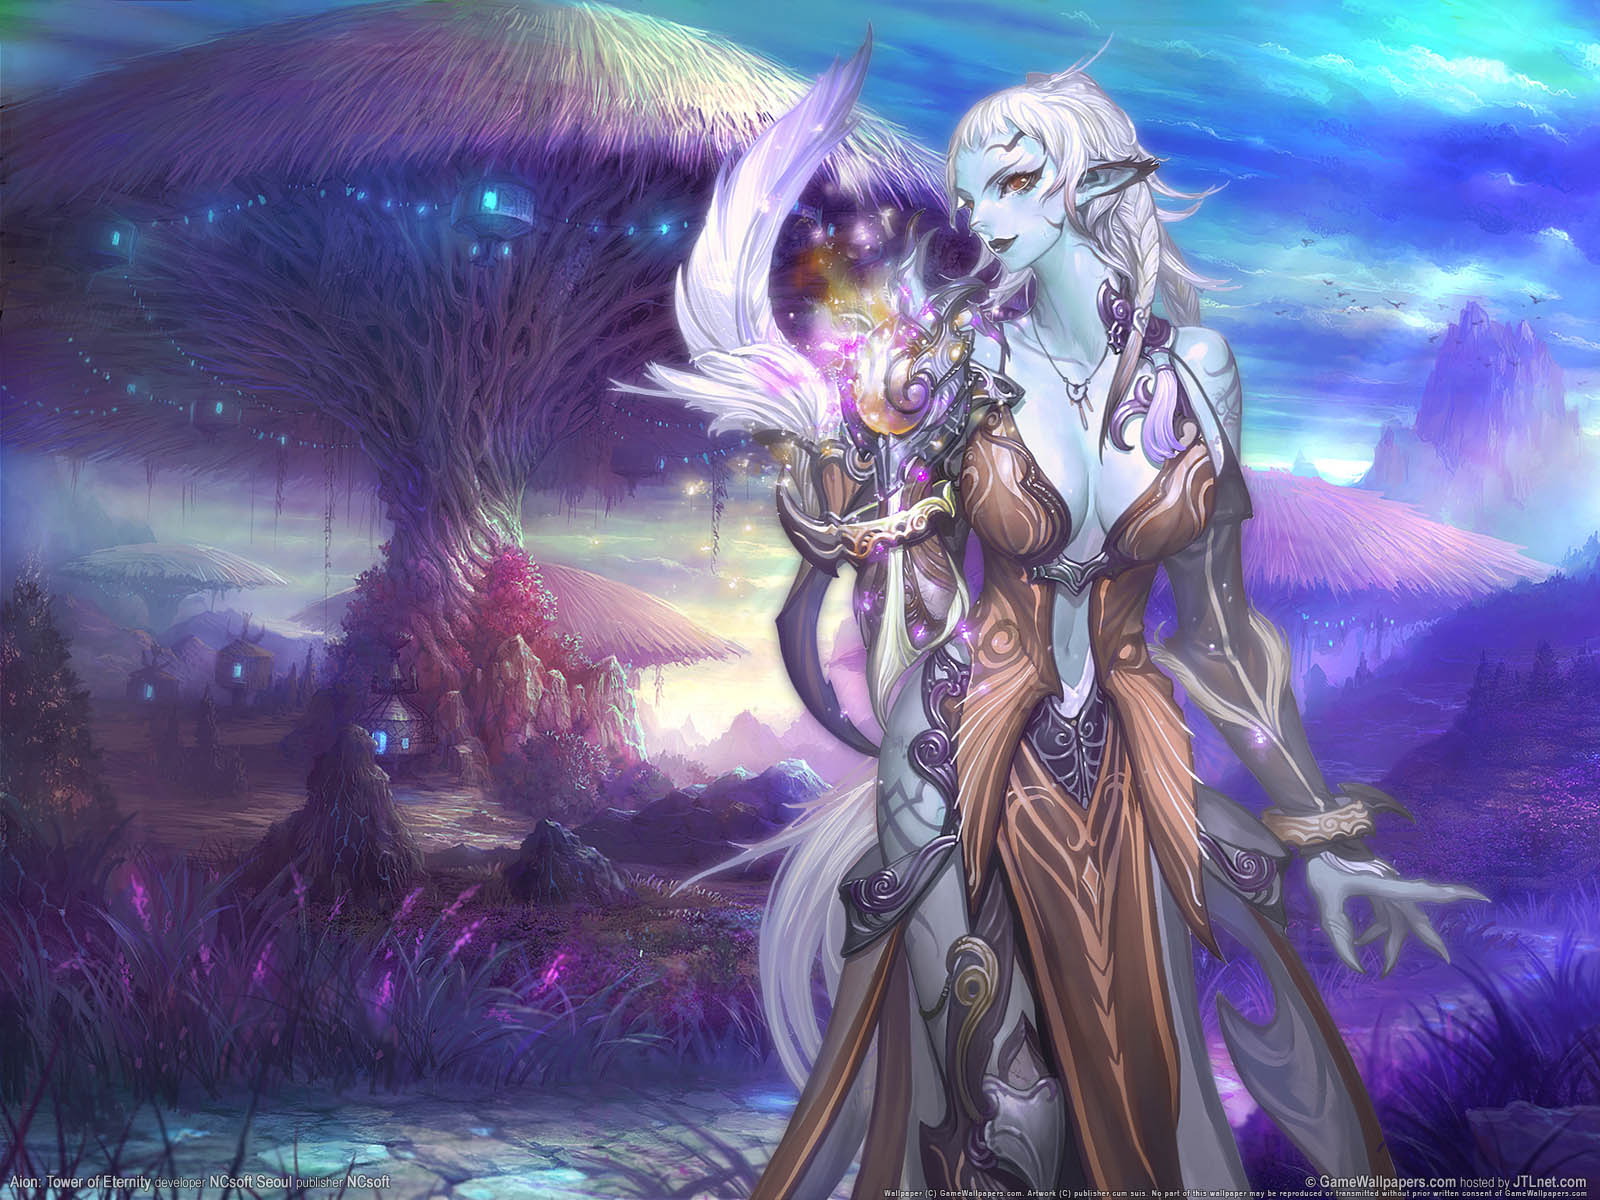 Aion%3A Tower of Eternity achtergrond 10 1600x1200